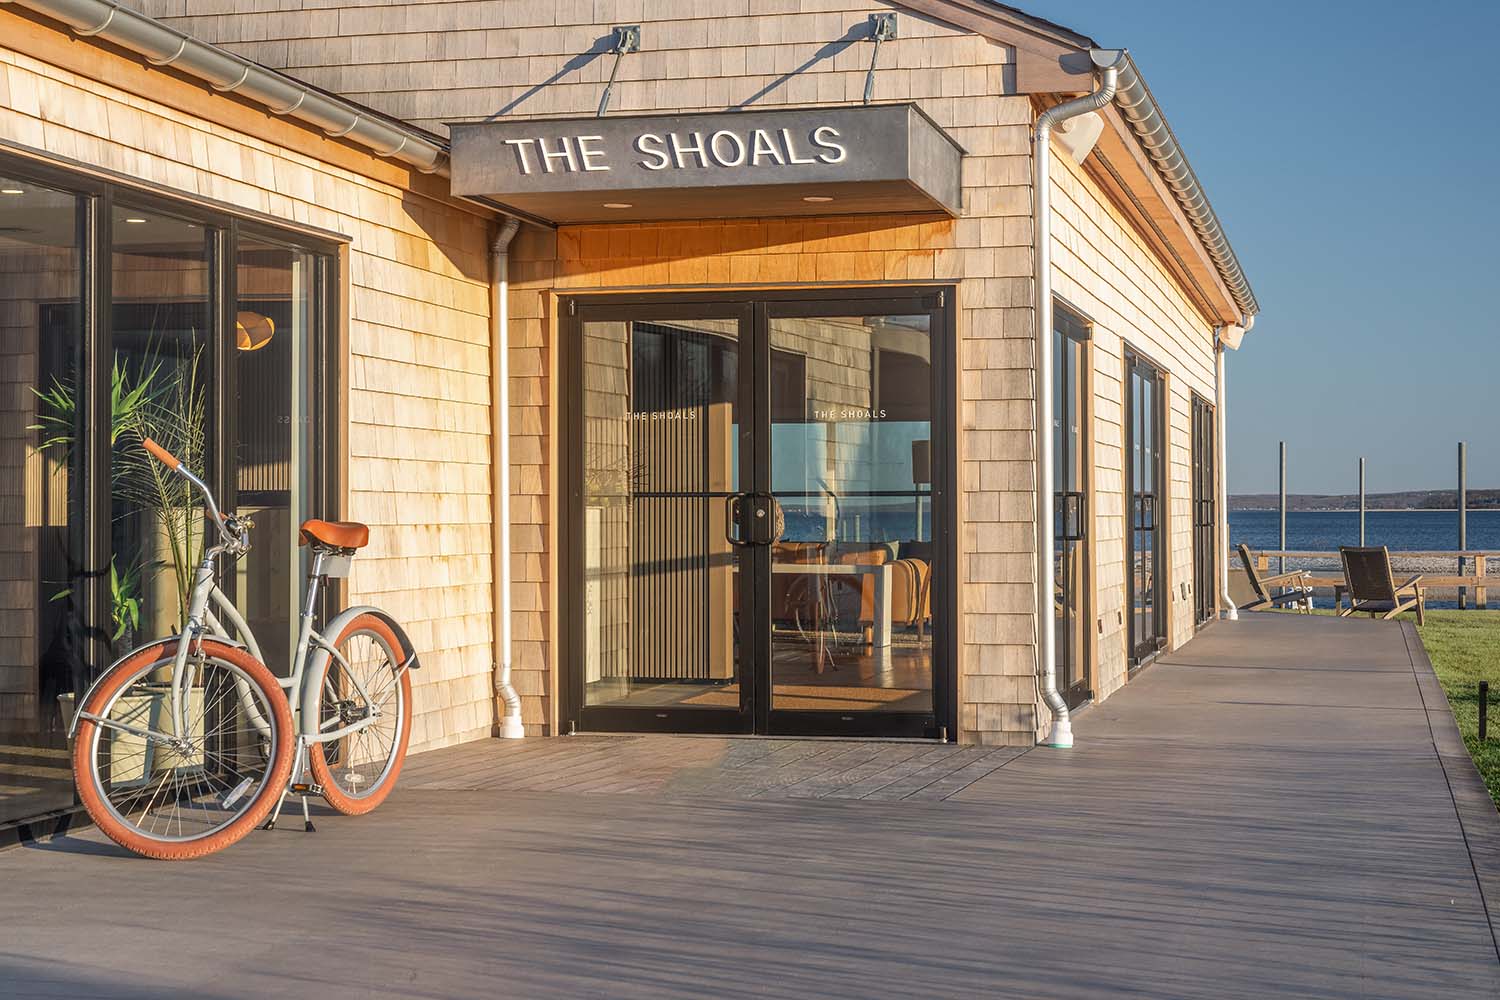 The Shoals Southold Long Island New York